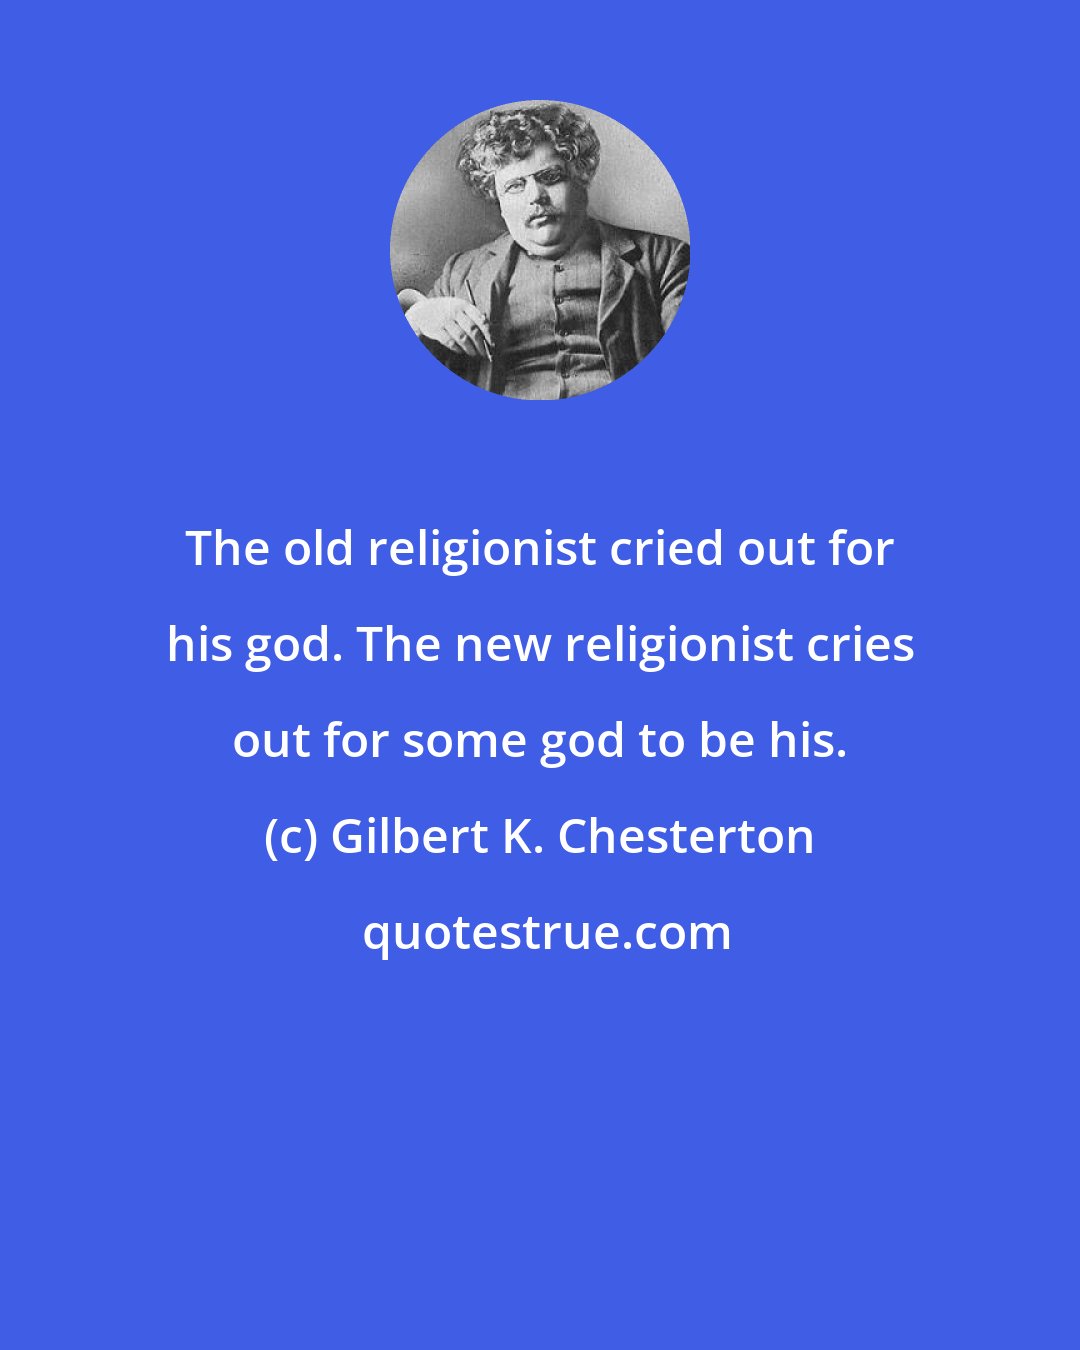 Gilbert K. Chesterton: The old religionist cried out for his god. The new religionist cries out for some god to be his.